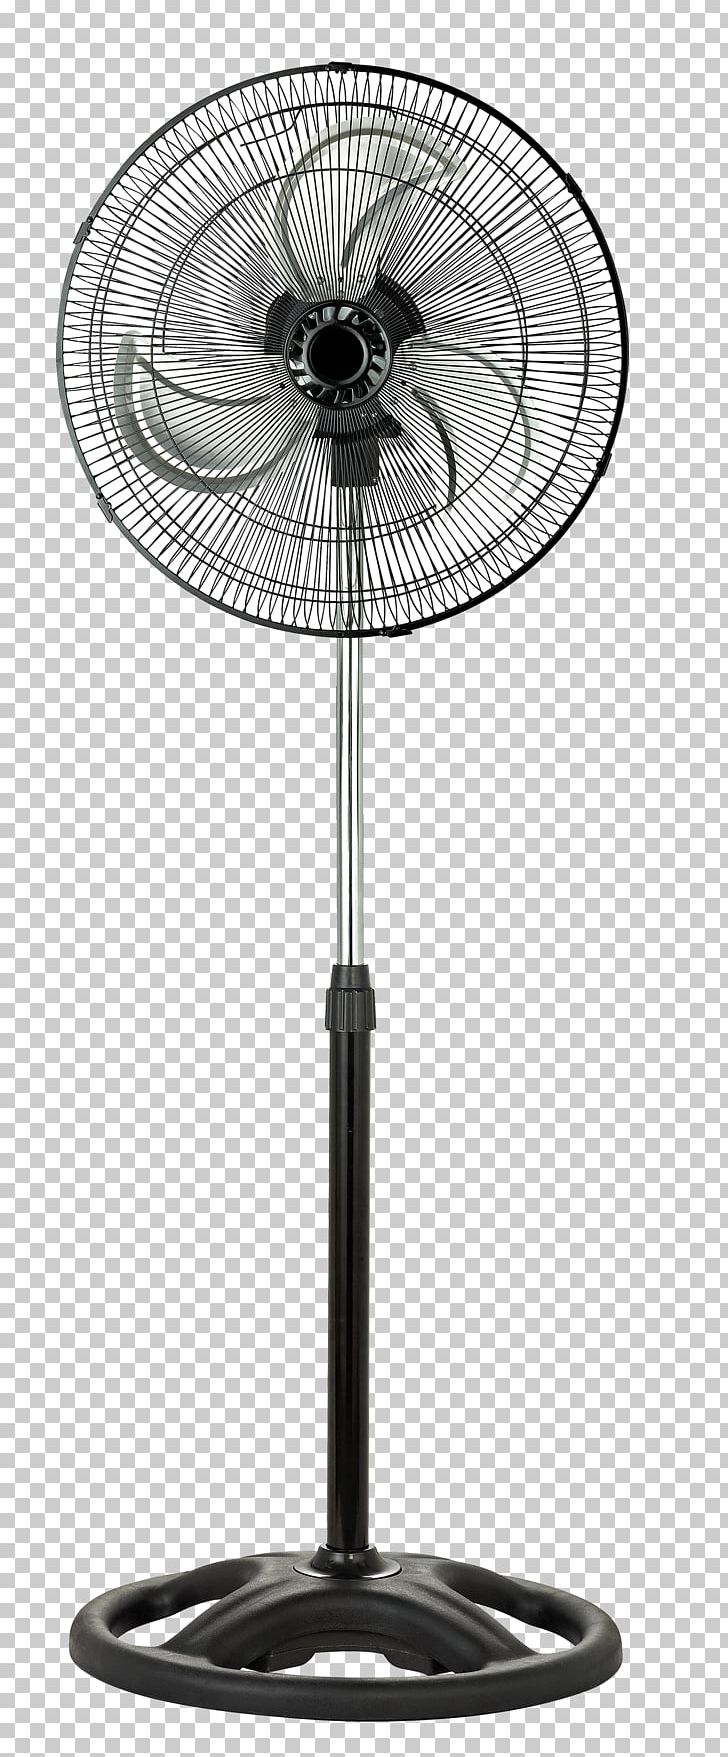 Window Fan Ceiling Fans Table Home Appliance PNG, Clipart, Air, Black And White, Blade, Ceiling, Ceiling Fans Free PNG Download